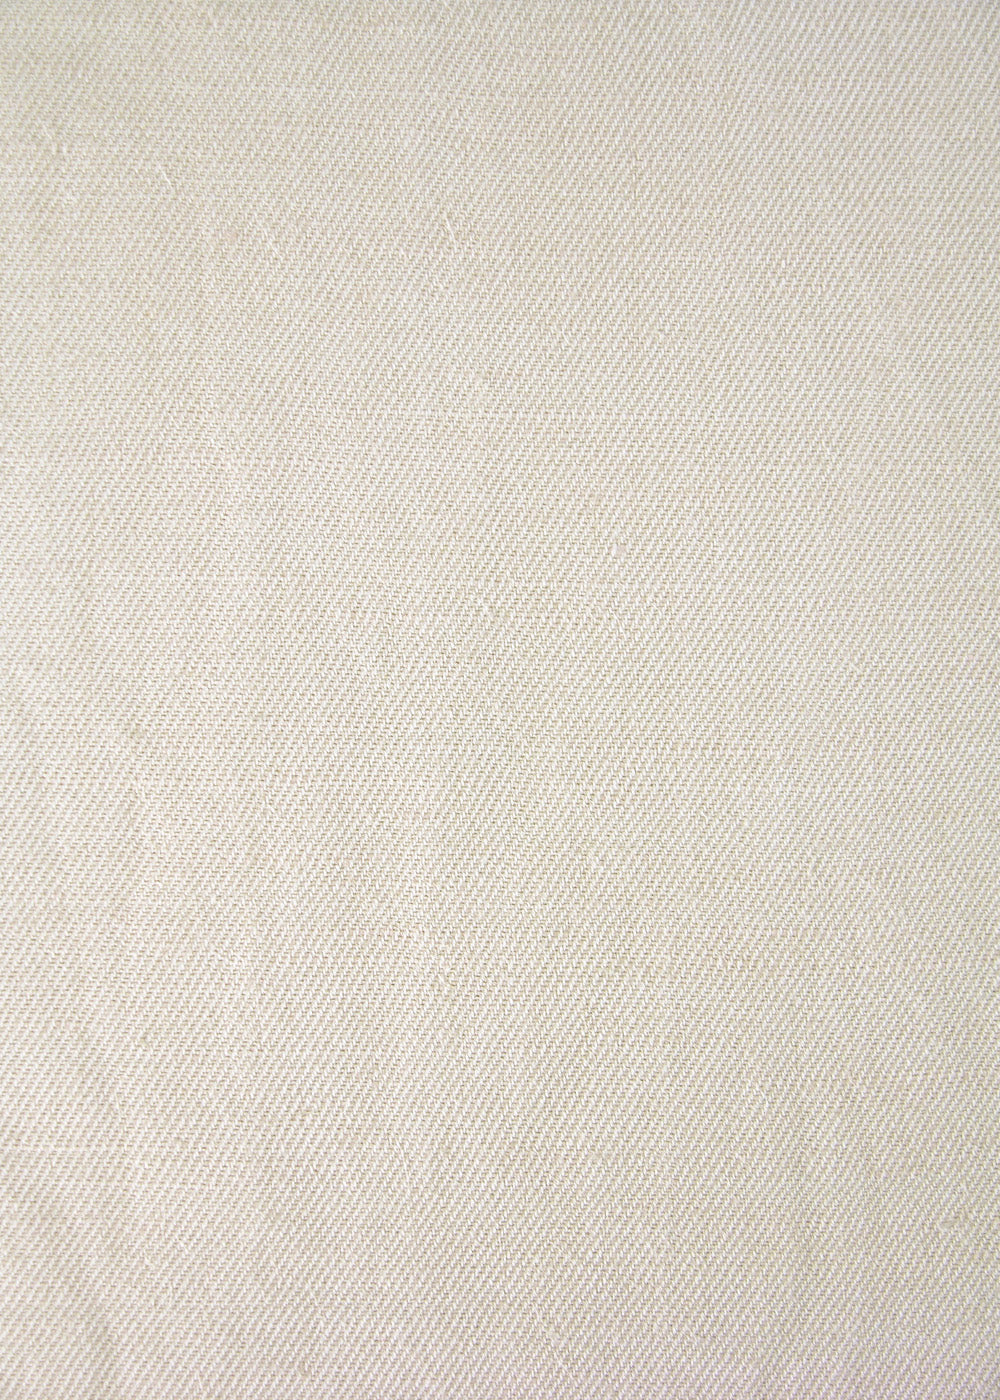 off-white upholstery weight plain fabric